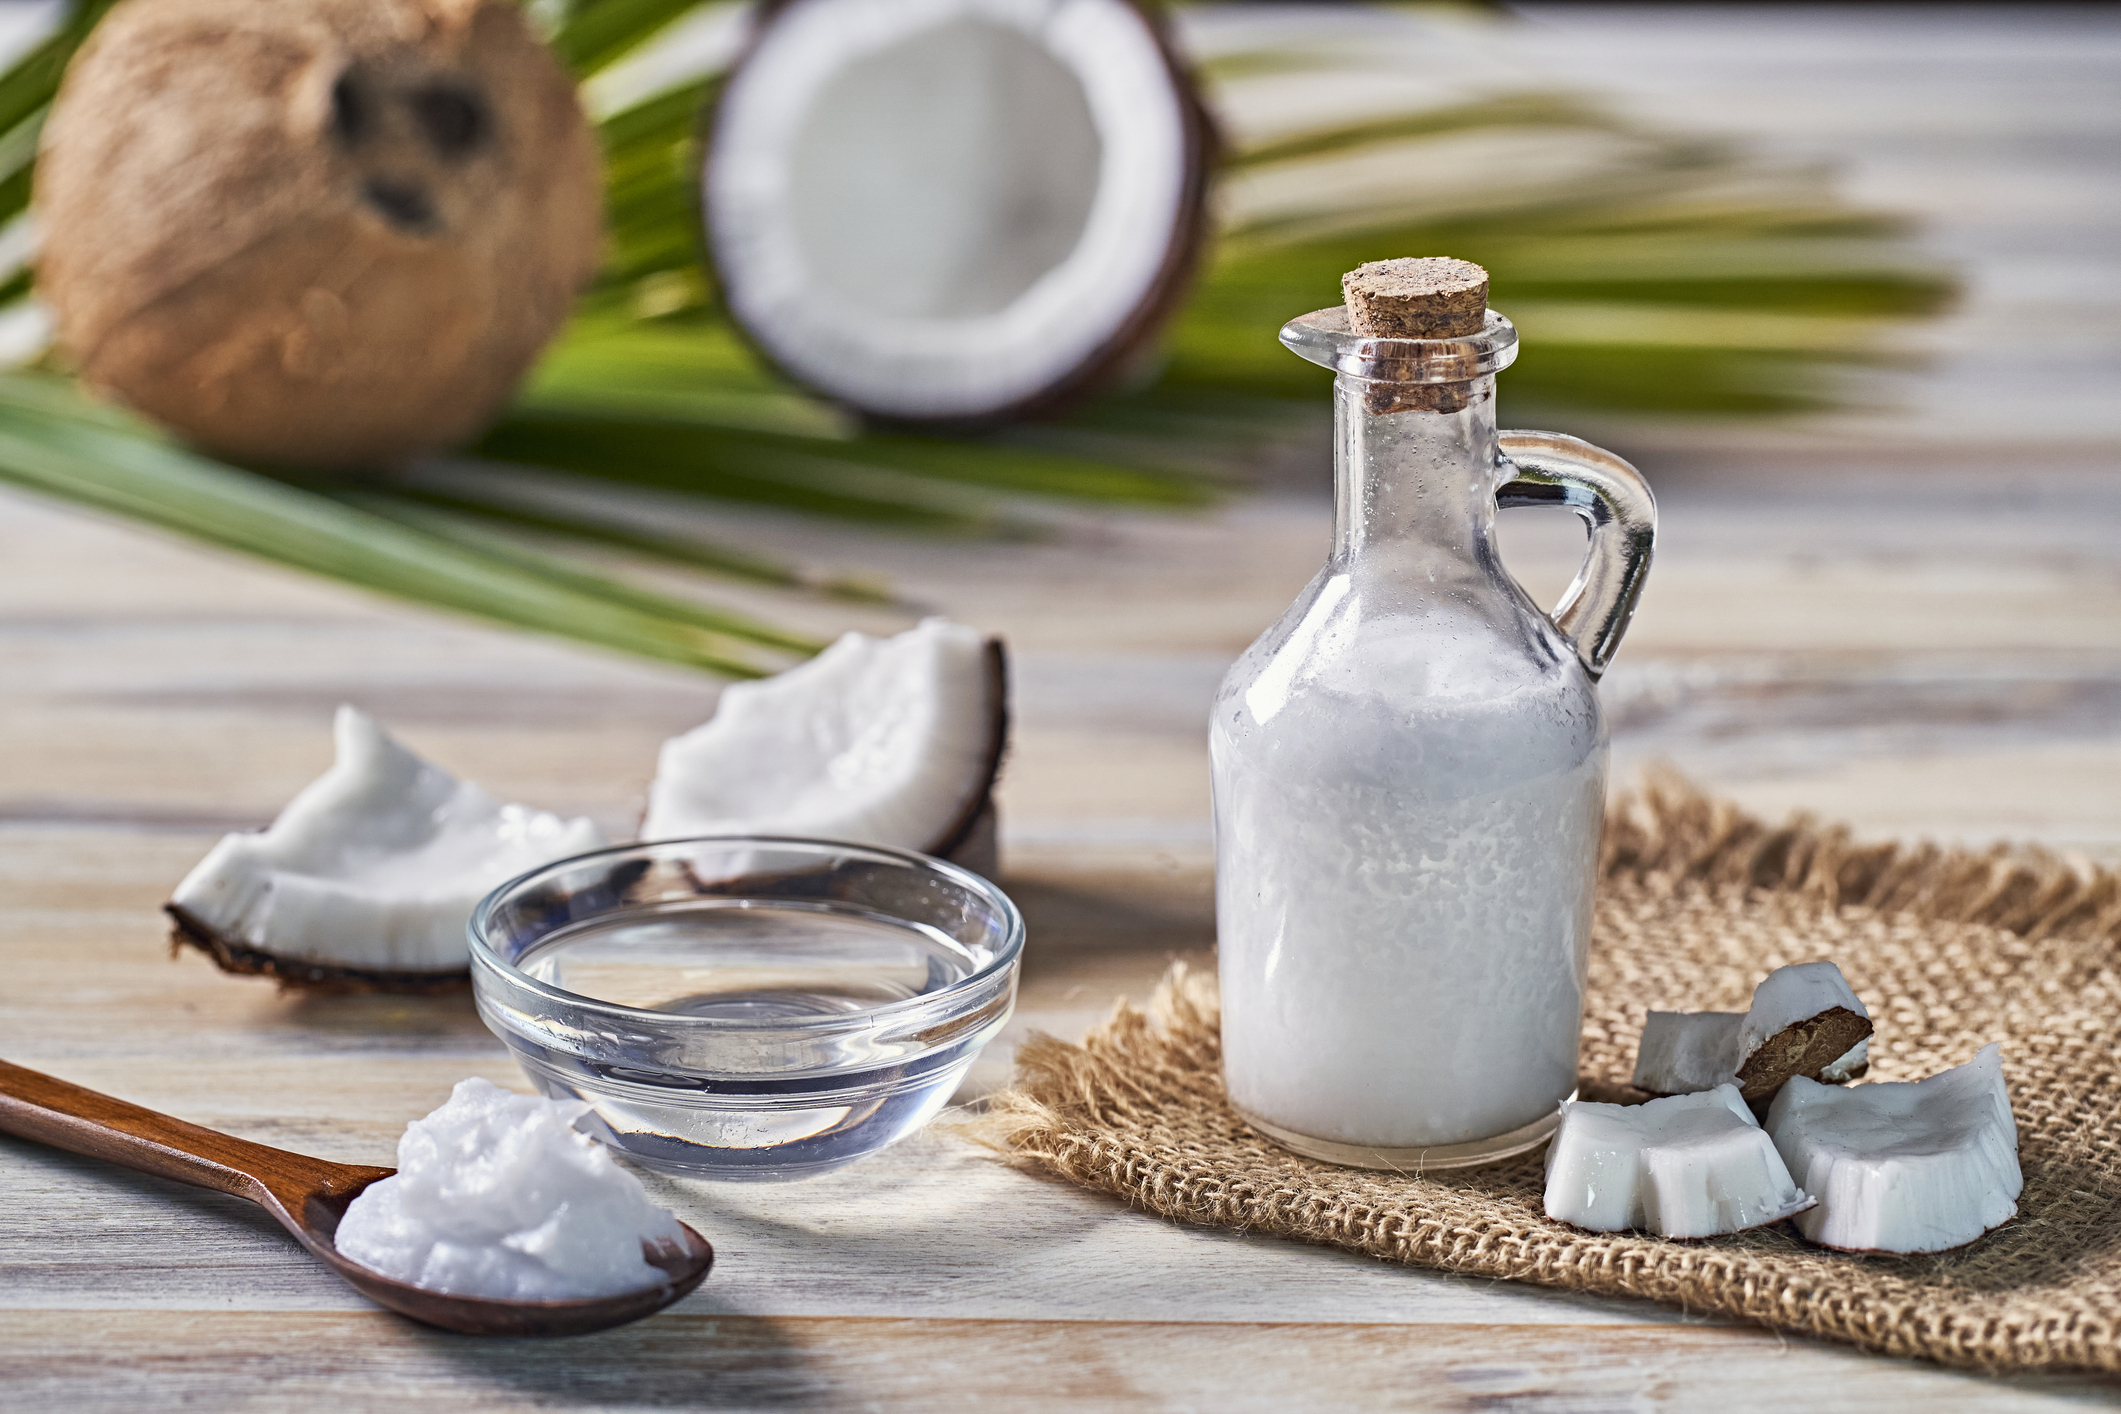 12 ways coconut oil makes life better